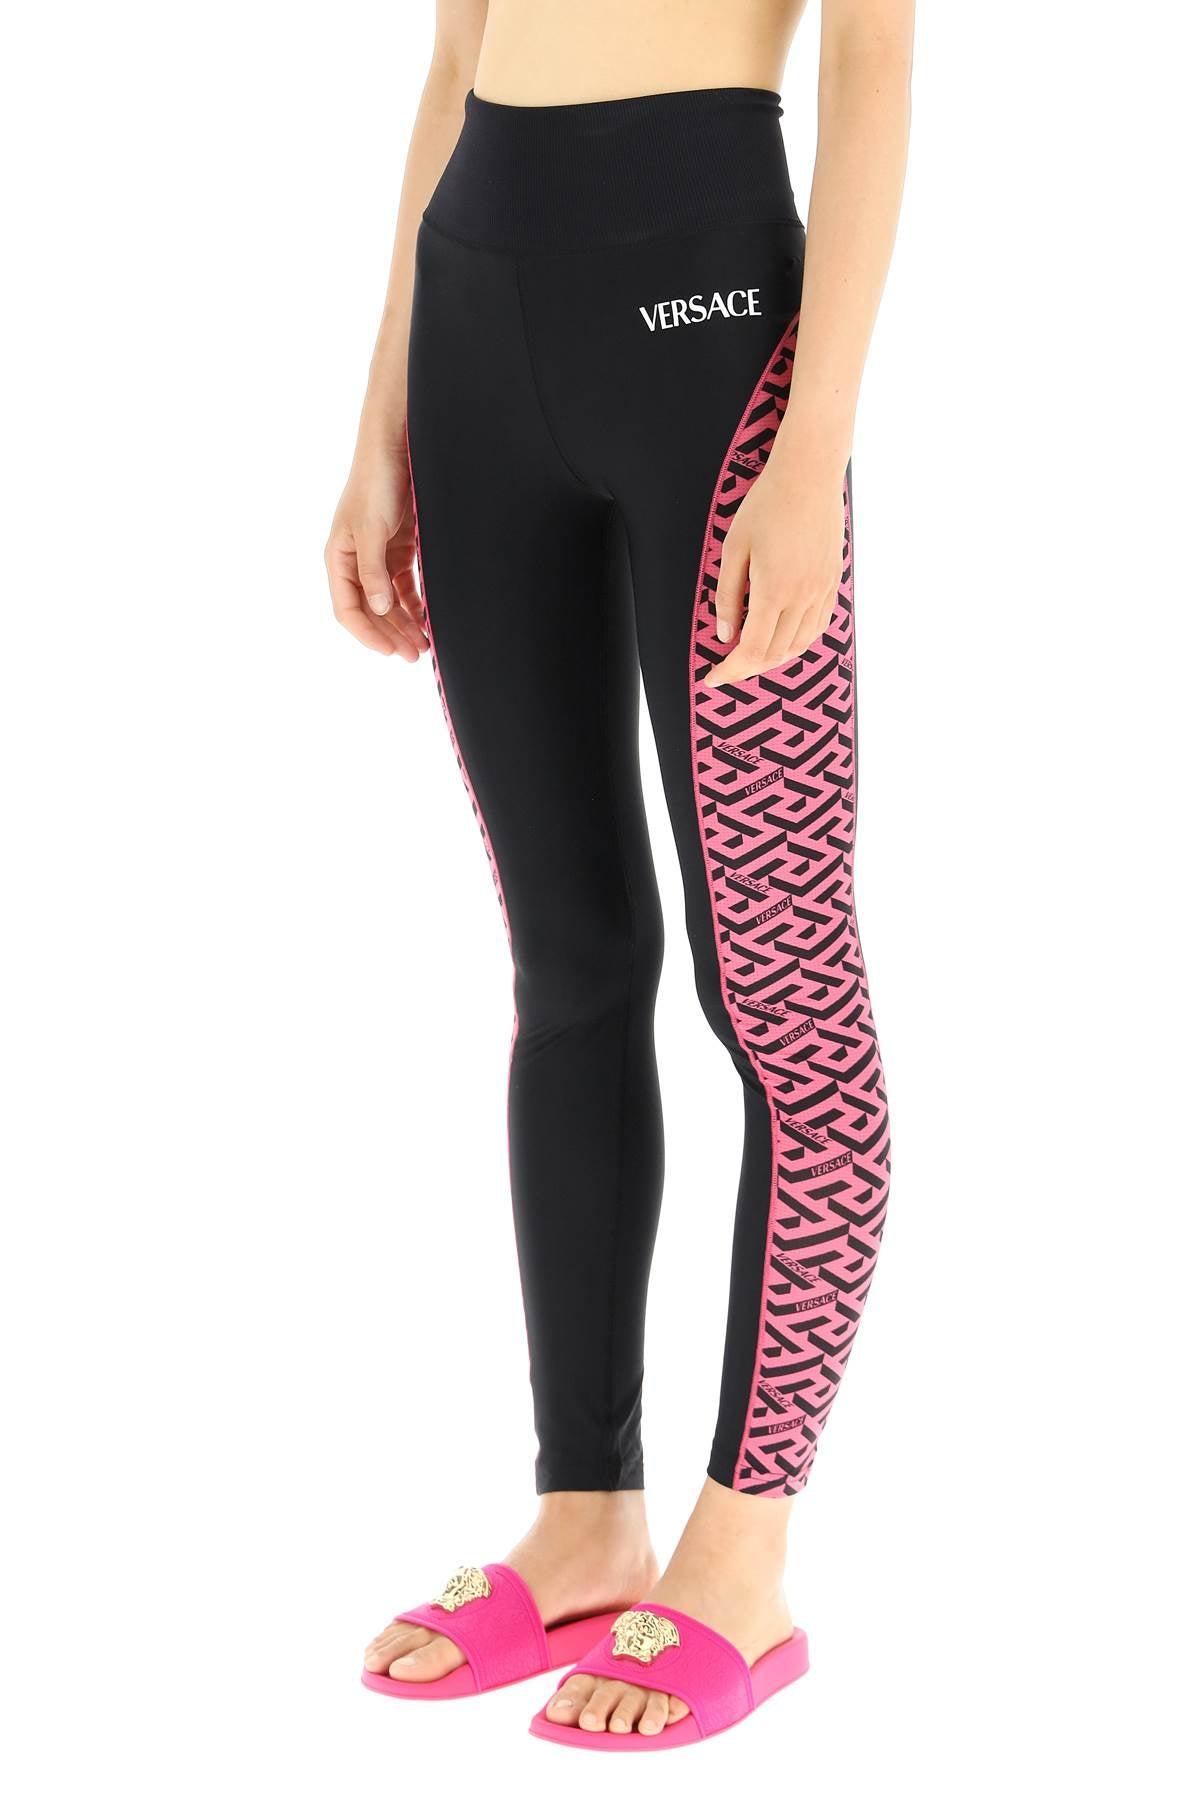 Versace Sports Leggings With Greca Signature Inserts in Black - Save 47% |  Lyst